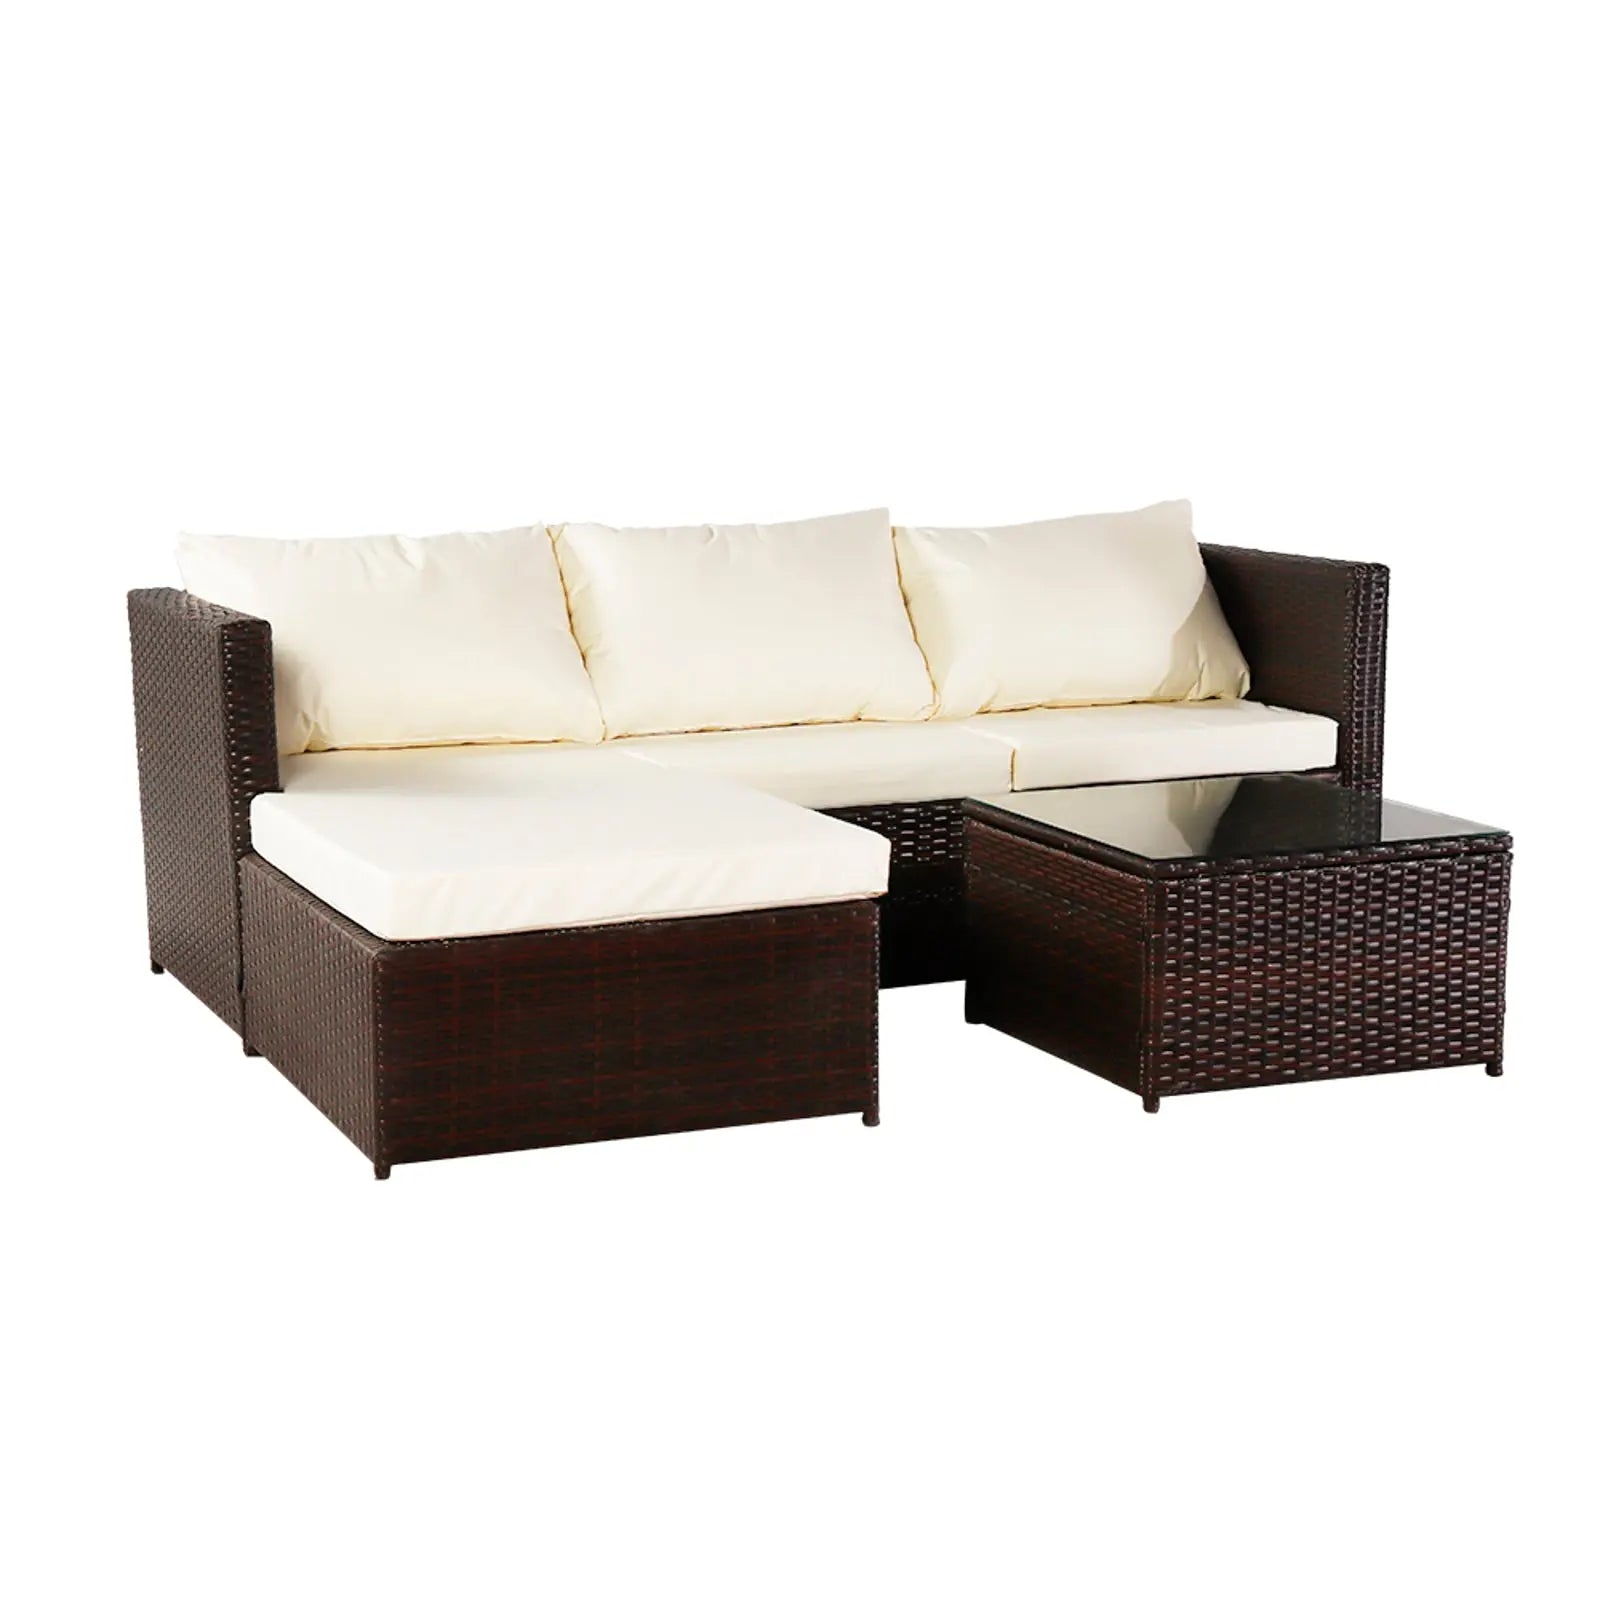 Three-piece Conjoined Sofa Pedal Coffee Table Brown (Combination of 2 Boxes) - Image #1